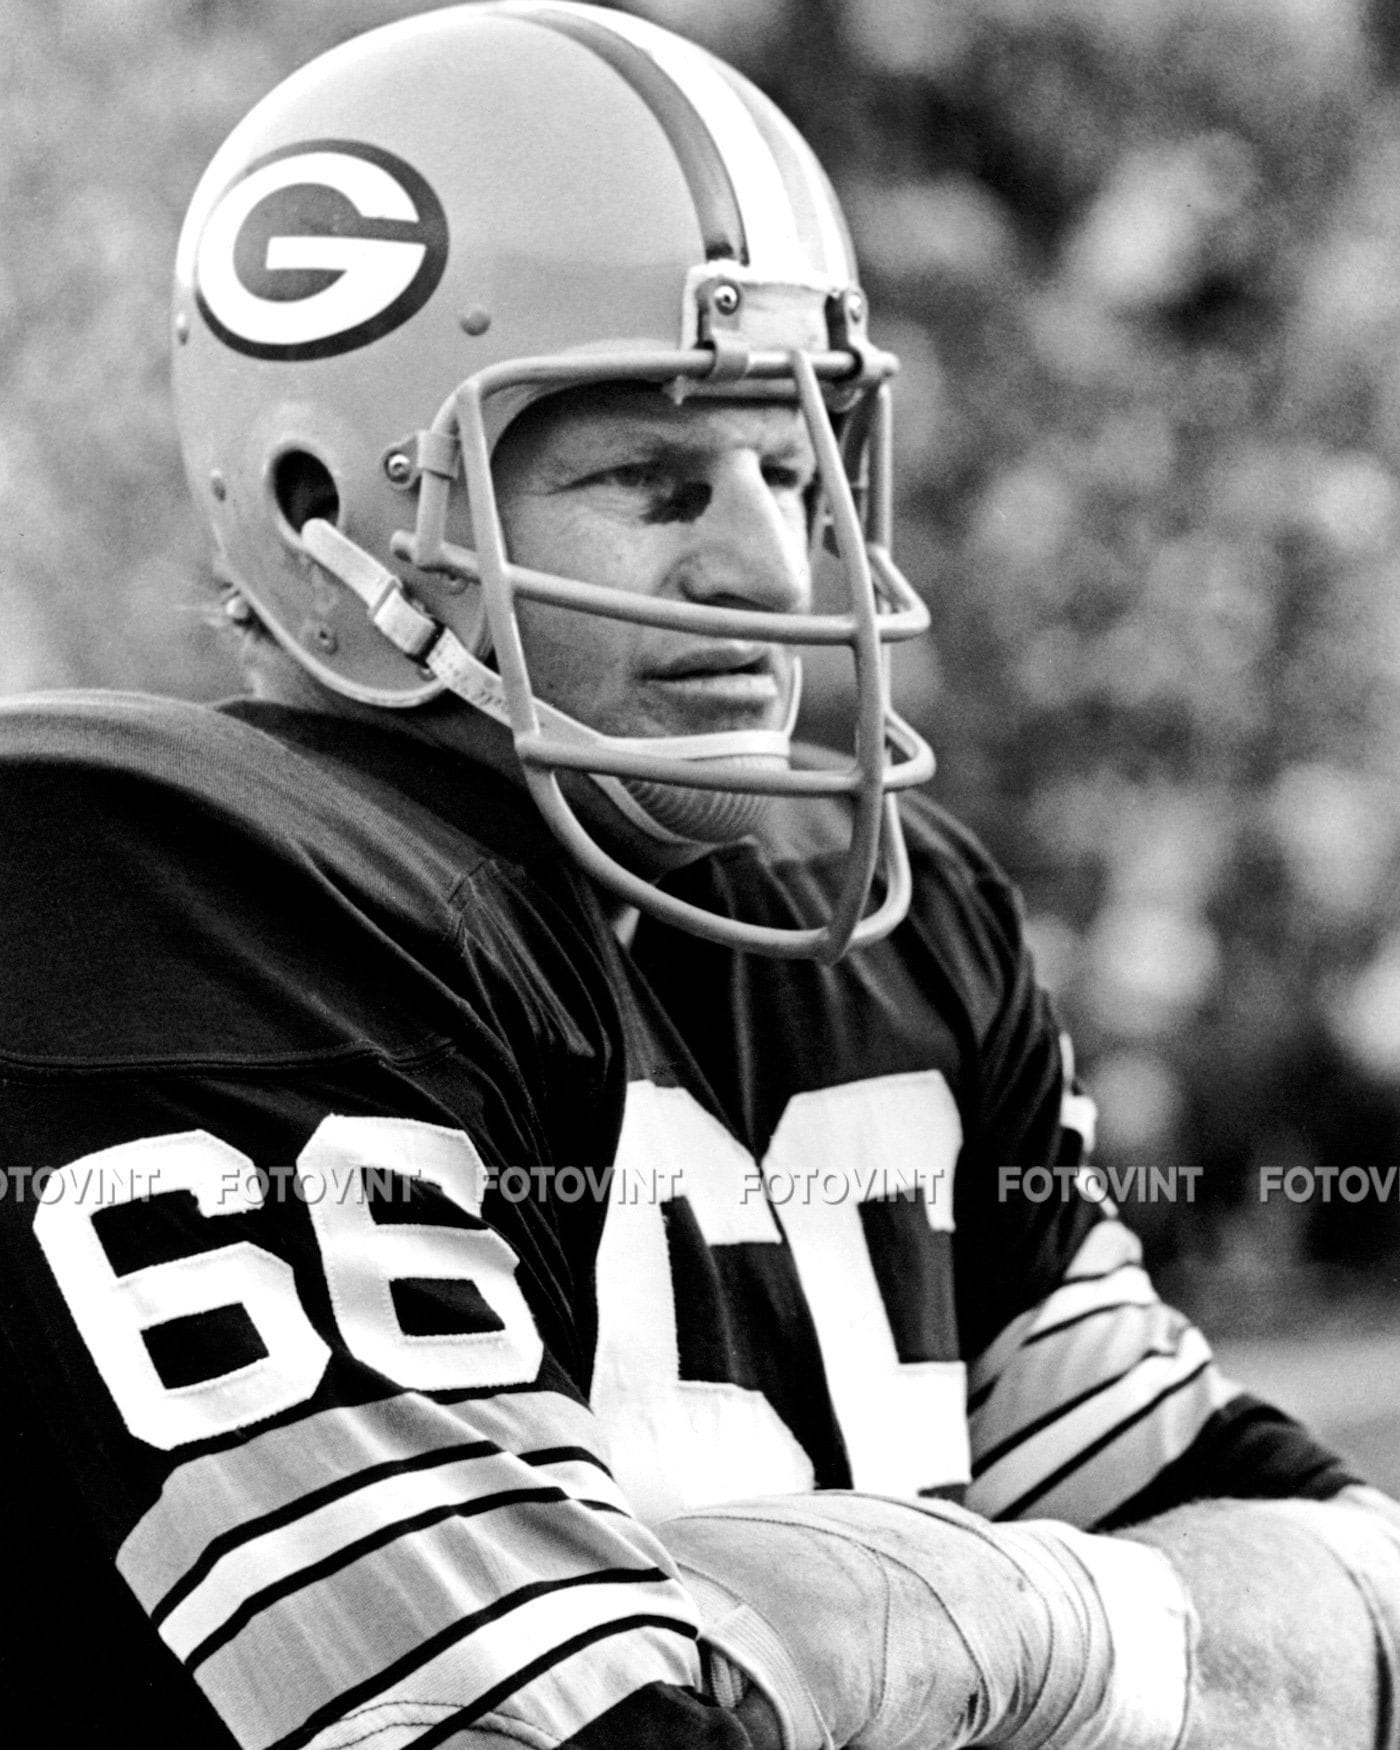 Ray Nitschke GREEN BAY PACKERS Photo Picture Lambeau Field Legend Vintage  Football Photograph Print 8x10, 8.5x11, 11x14 or 16x20 (RN4)